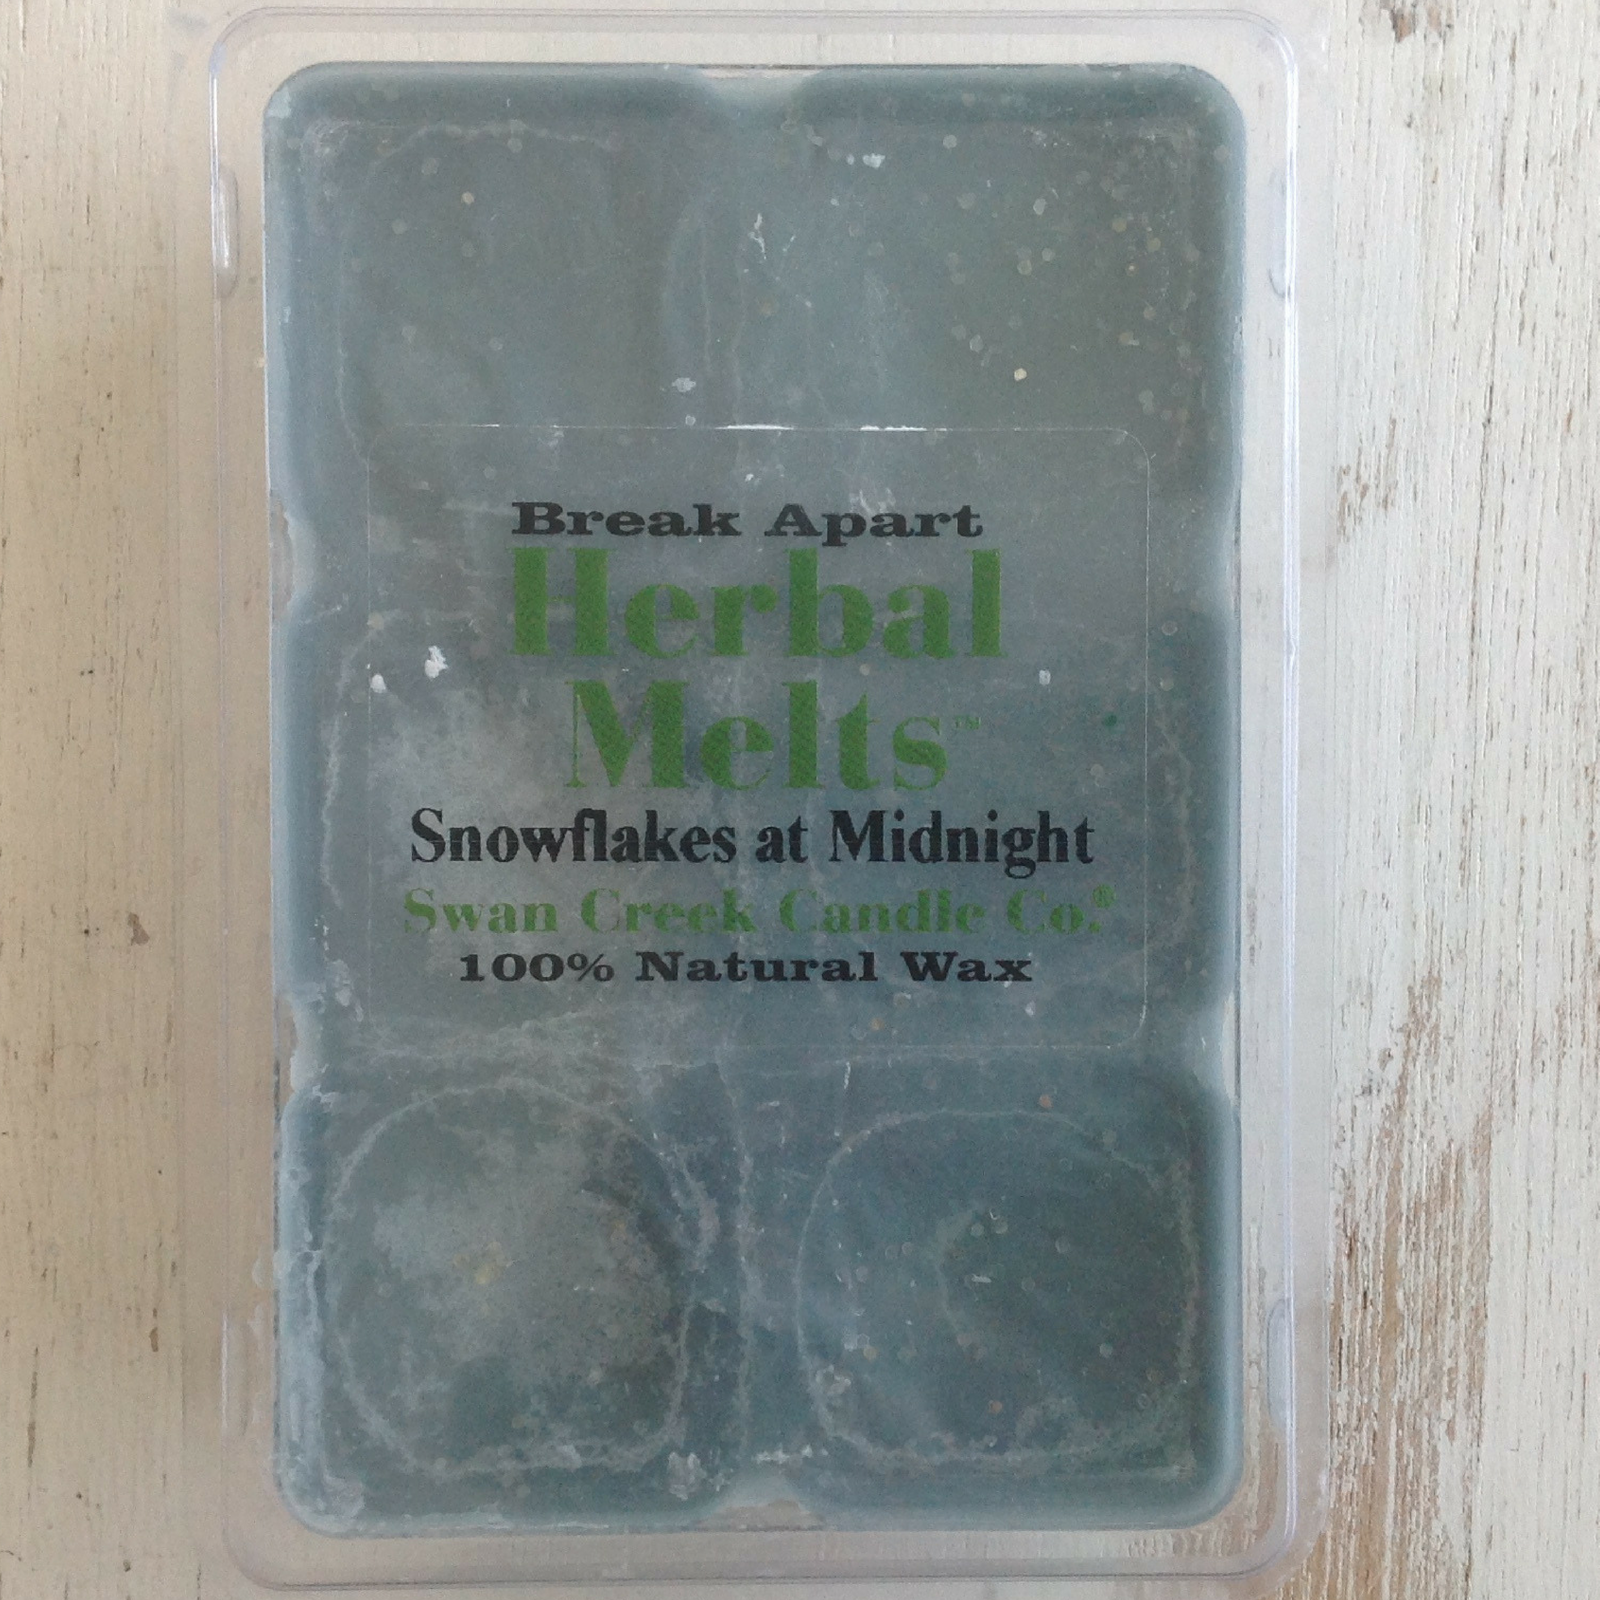 Swan Creek Candle Company Herbal Drizzle Wax Melts Snowflakes at Midnight